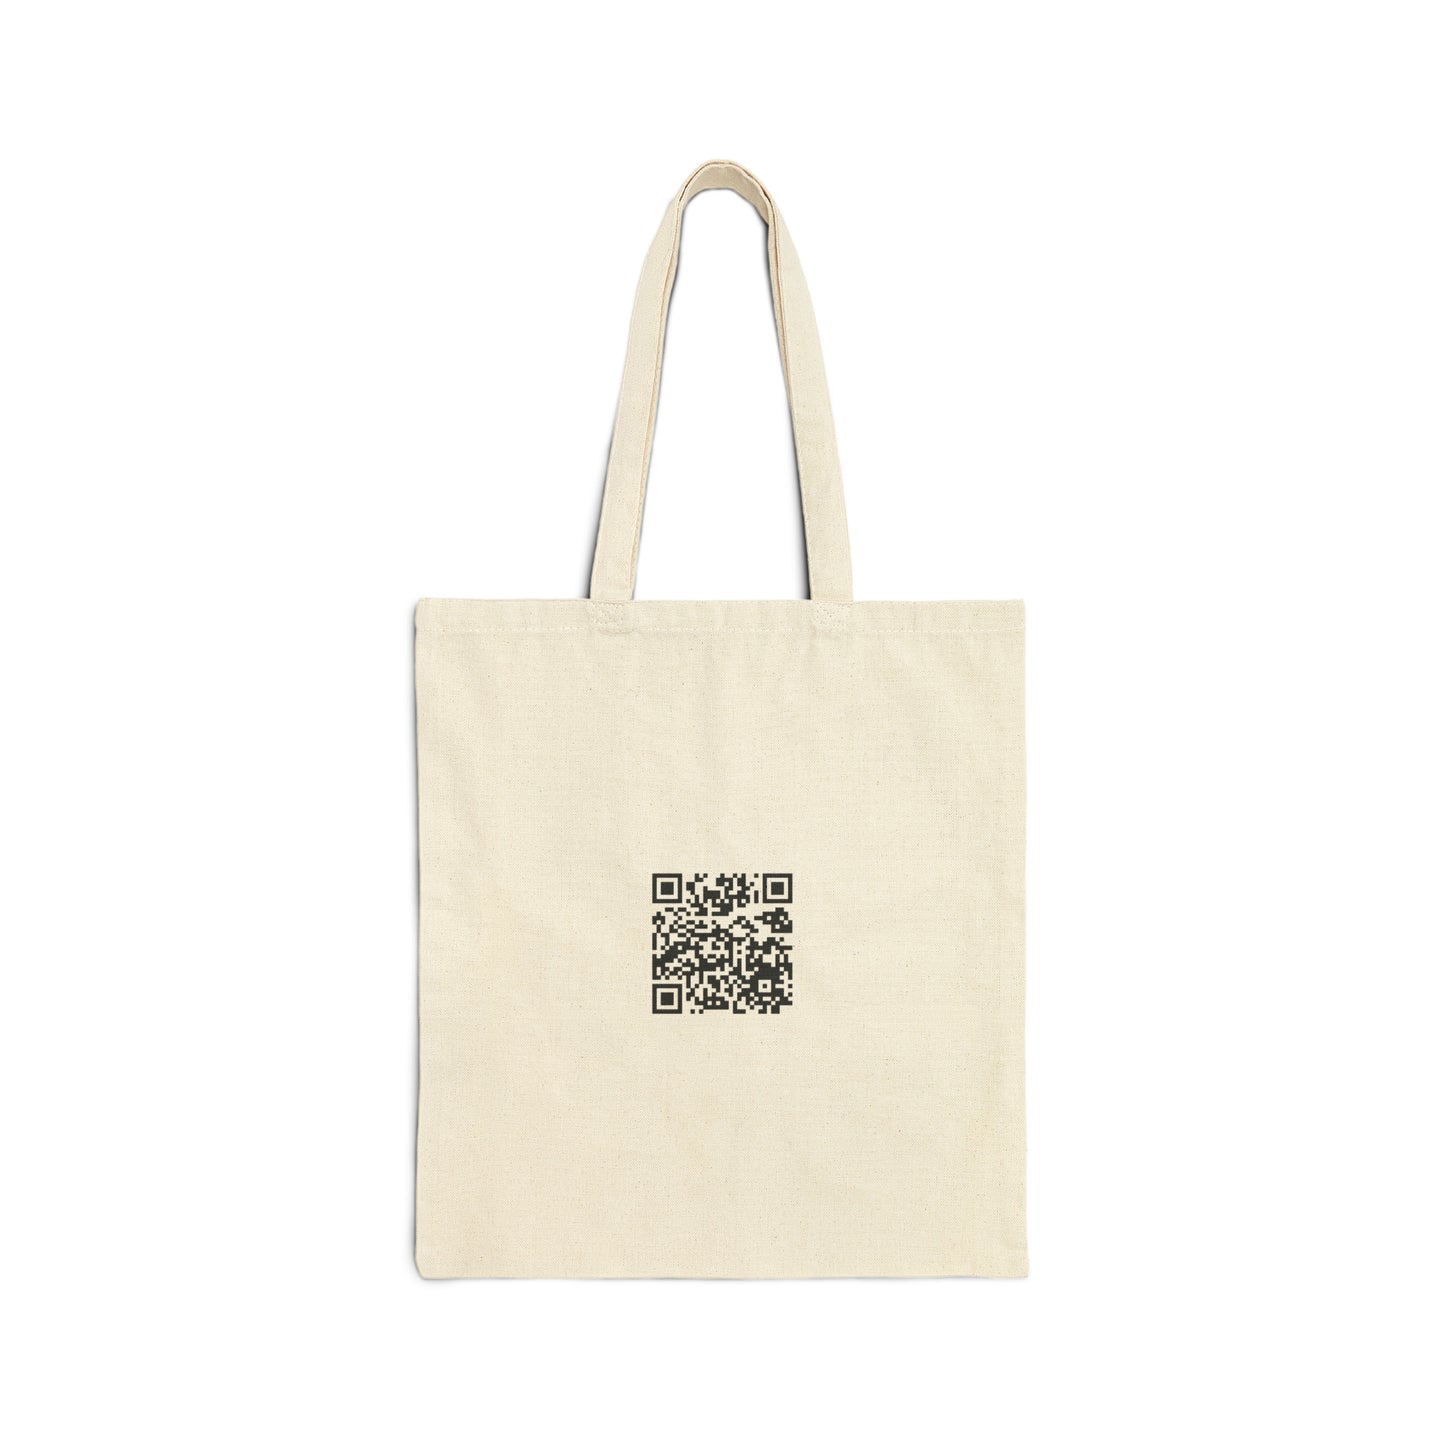 The Blooming Of Alison Brennan - Cotton Canvas Tote Bag